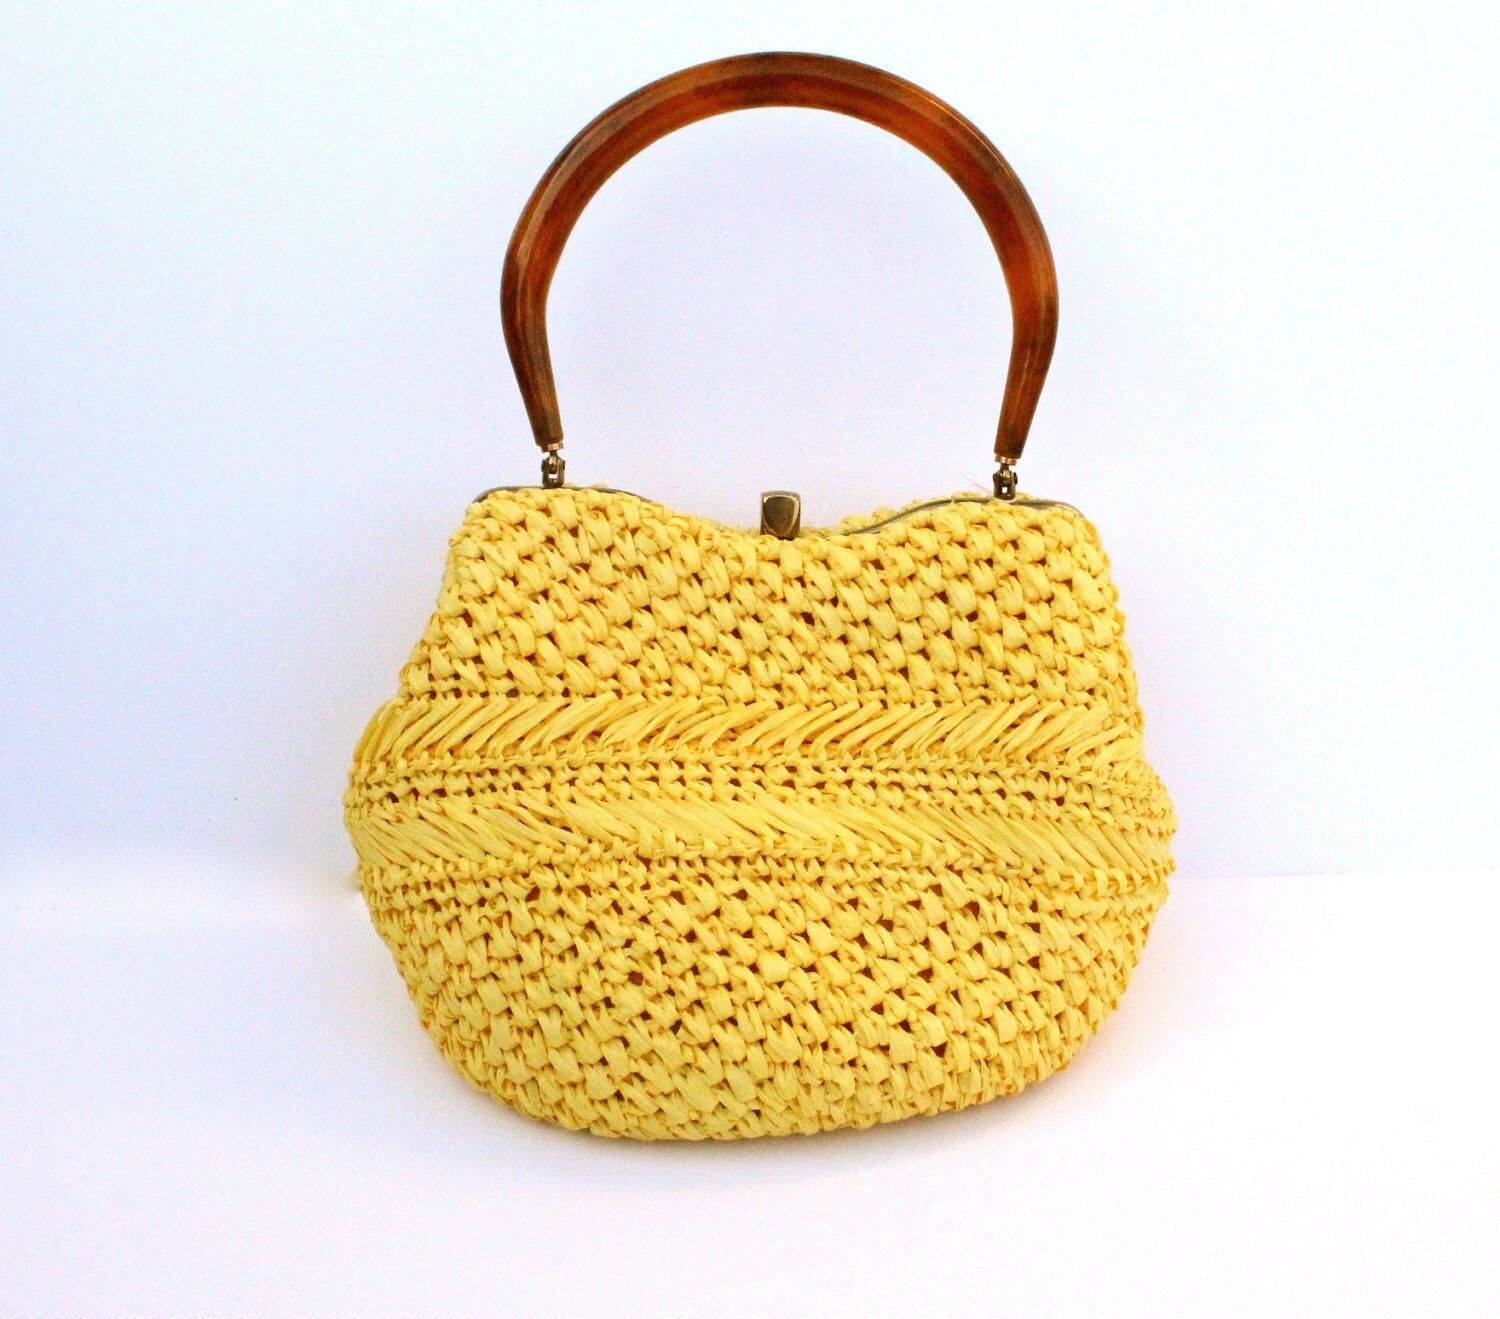 Vintage 1960s Bright Yellow Straw Purse with by MaejeanVintage